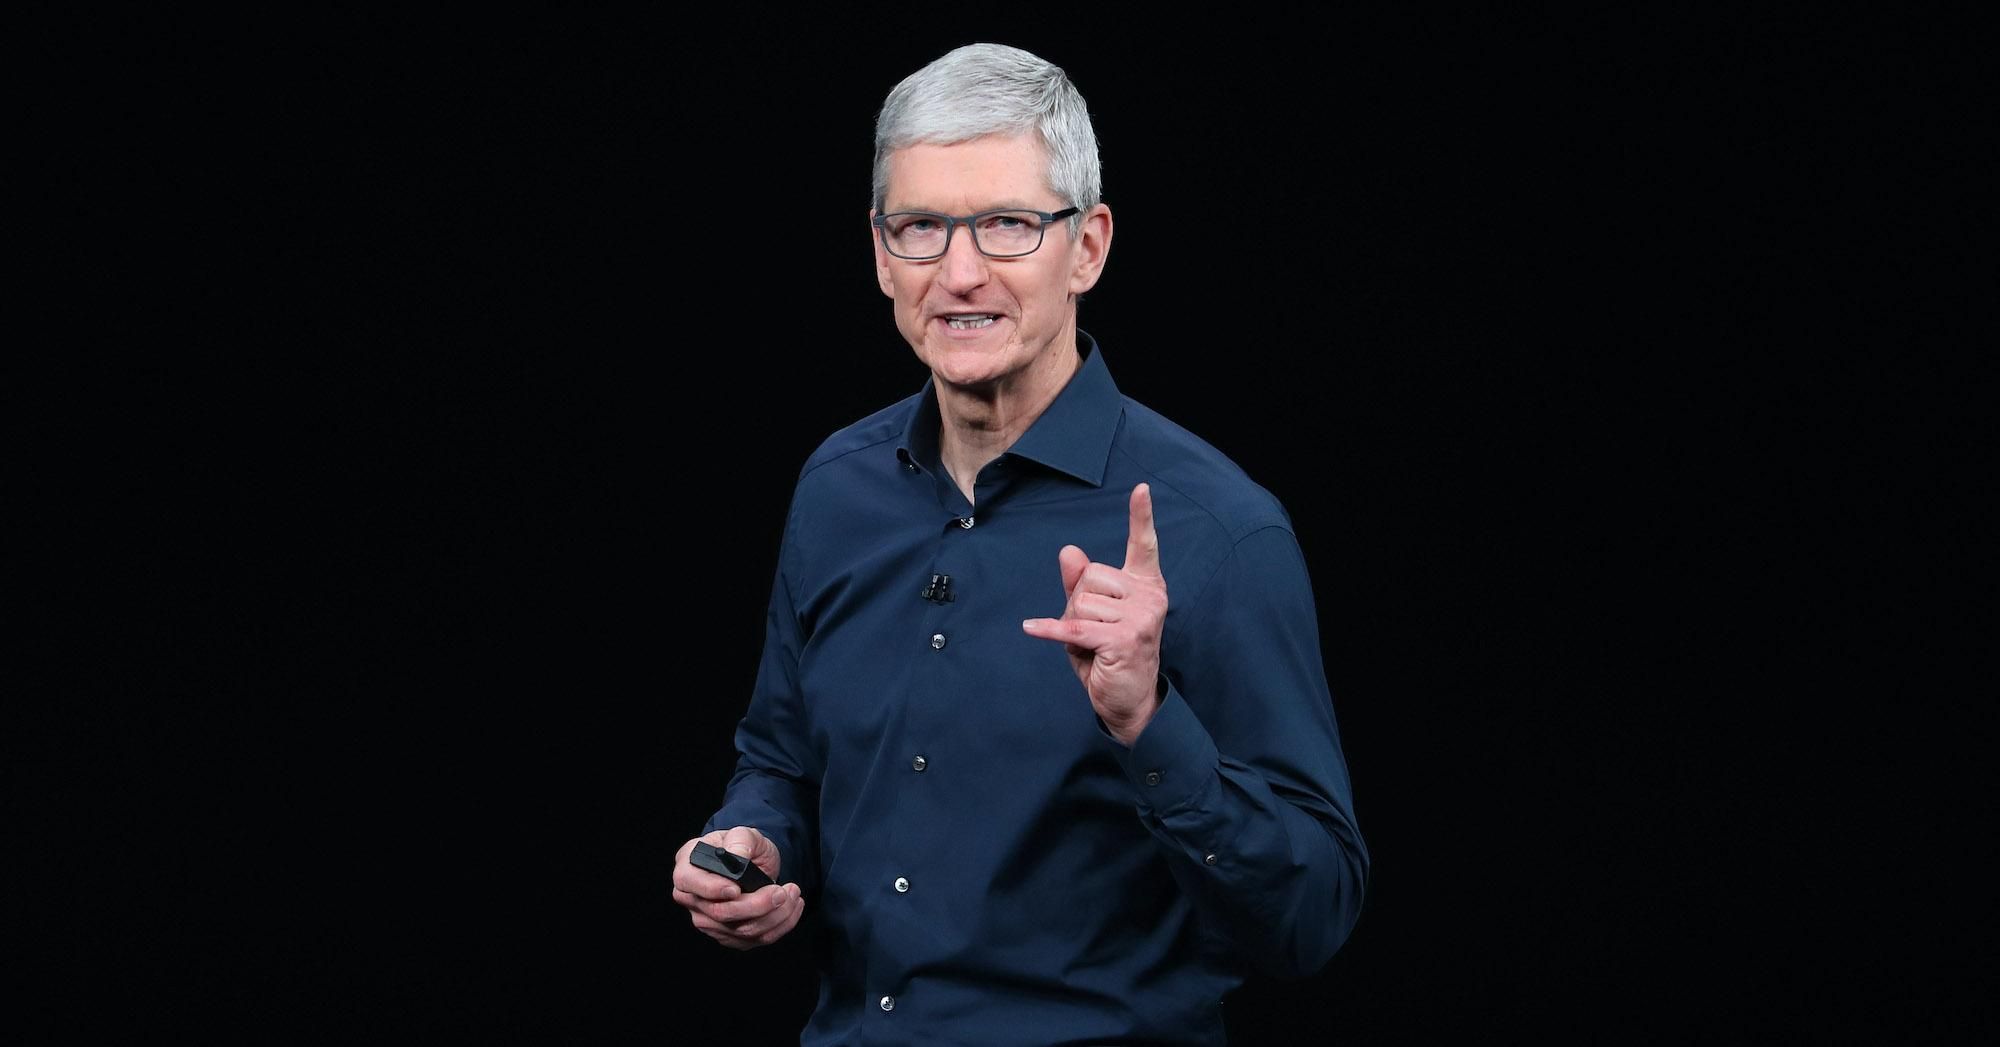 Tim Cook, chief executive officer of Apple, speaks during an Apple event at the Steve Jobs Theater at Apple Park on September 12, 2018 in Cupertino, California.